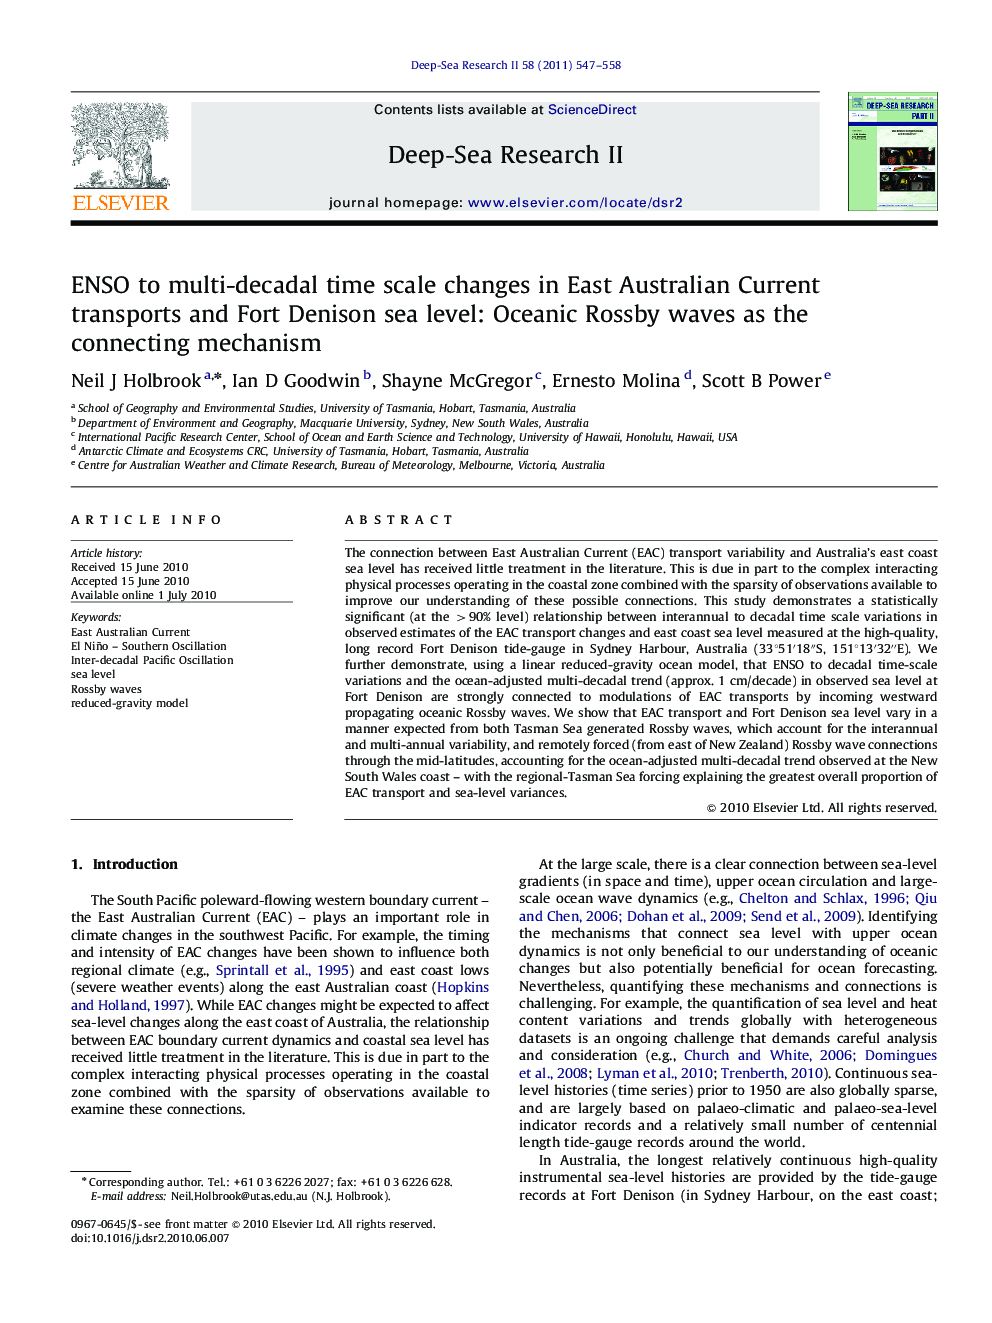 ENSO to multi-decadal time scale changes in East Australian Current transports and Fort Denison sea level: Oceanic Rossby waves as the connecting mechanism